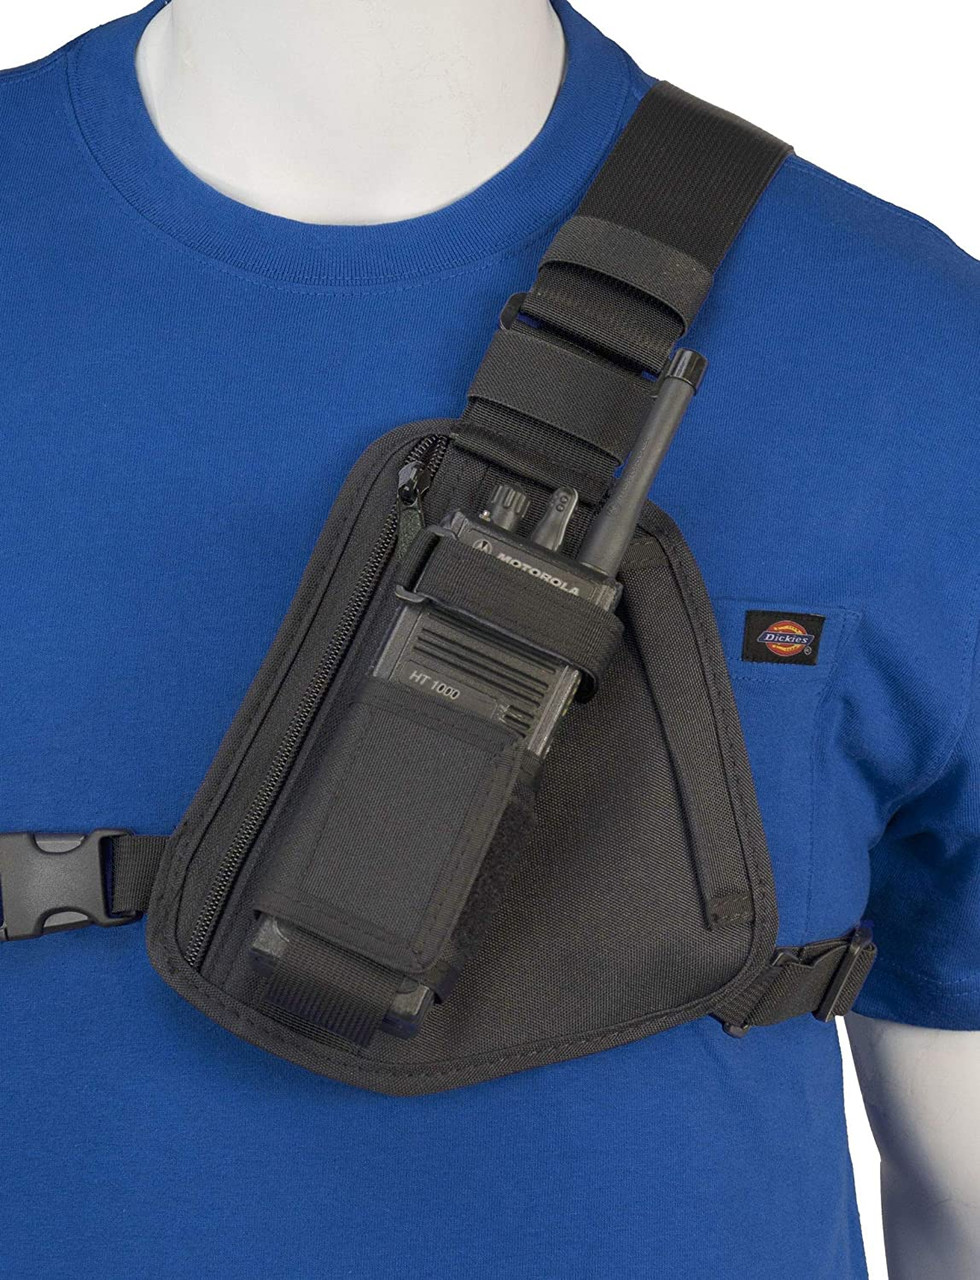 RCH-101 Radio Chest Harness - HiTech Wireless Store - Business Two